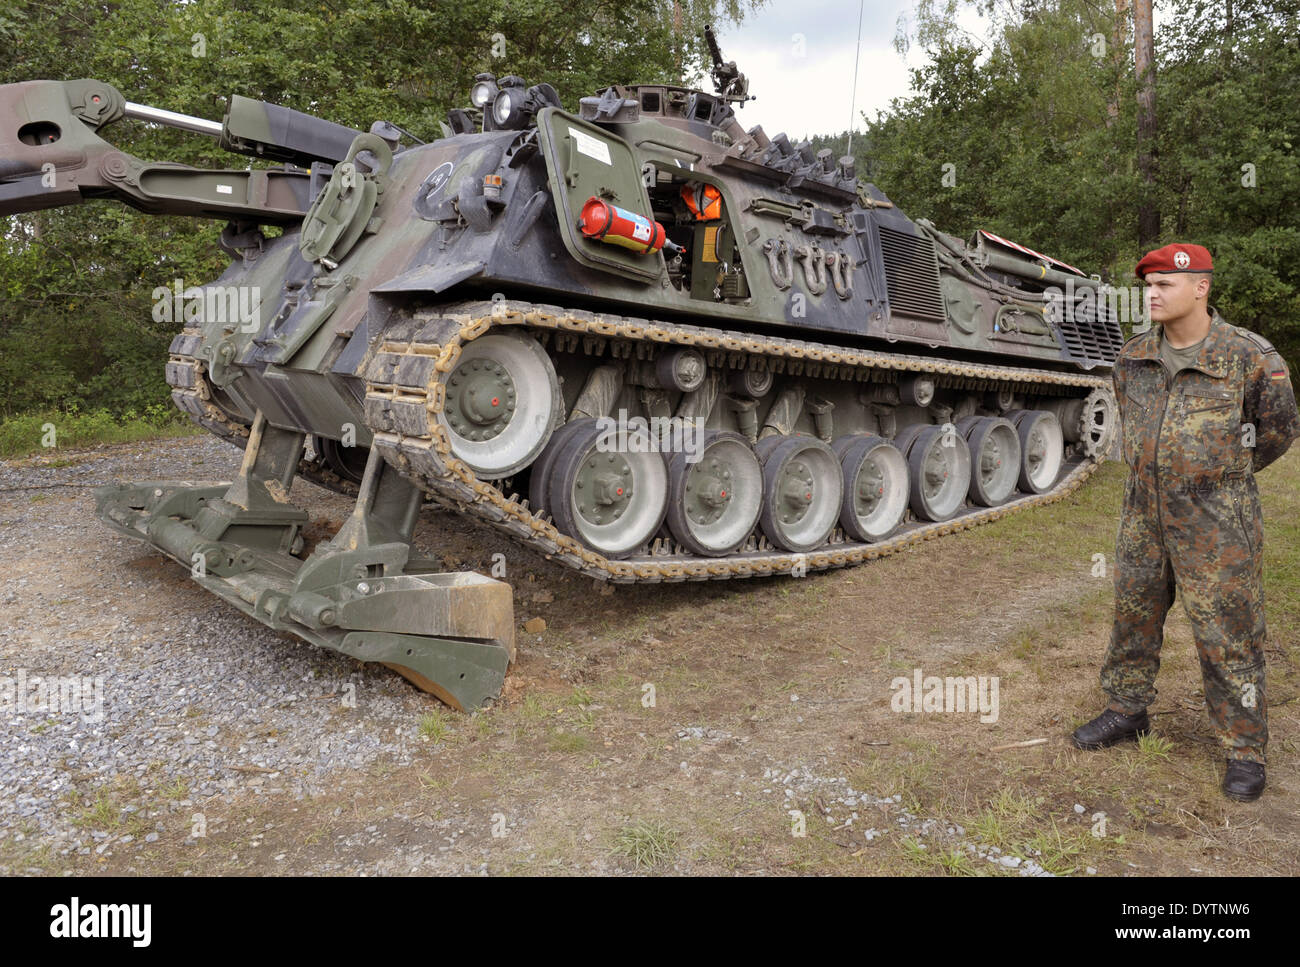 A Pionierpanzer Dachs (Badger Armoured Engineer Vehicle) Stock Photo